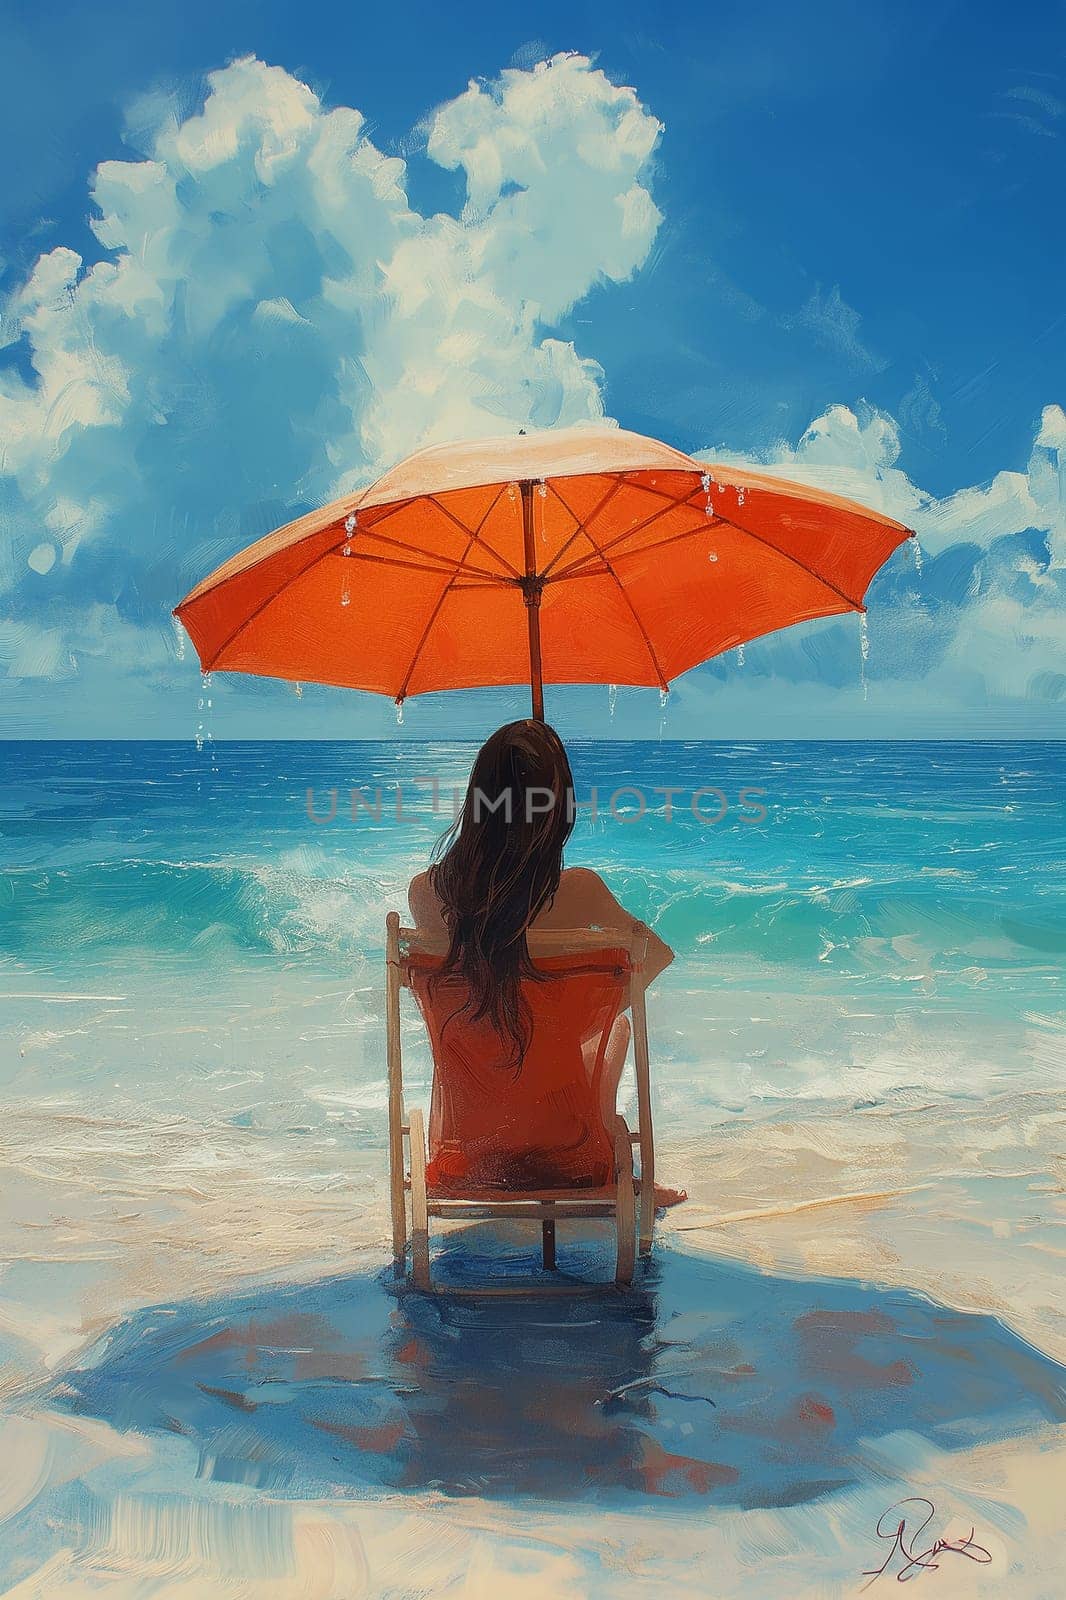 A person relaxes under an orange umbrella by a serene blue ocean with white clouds above.